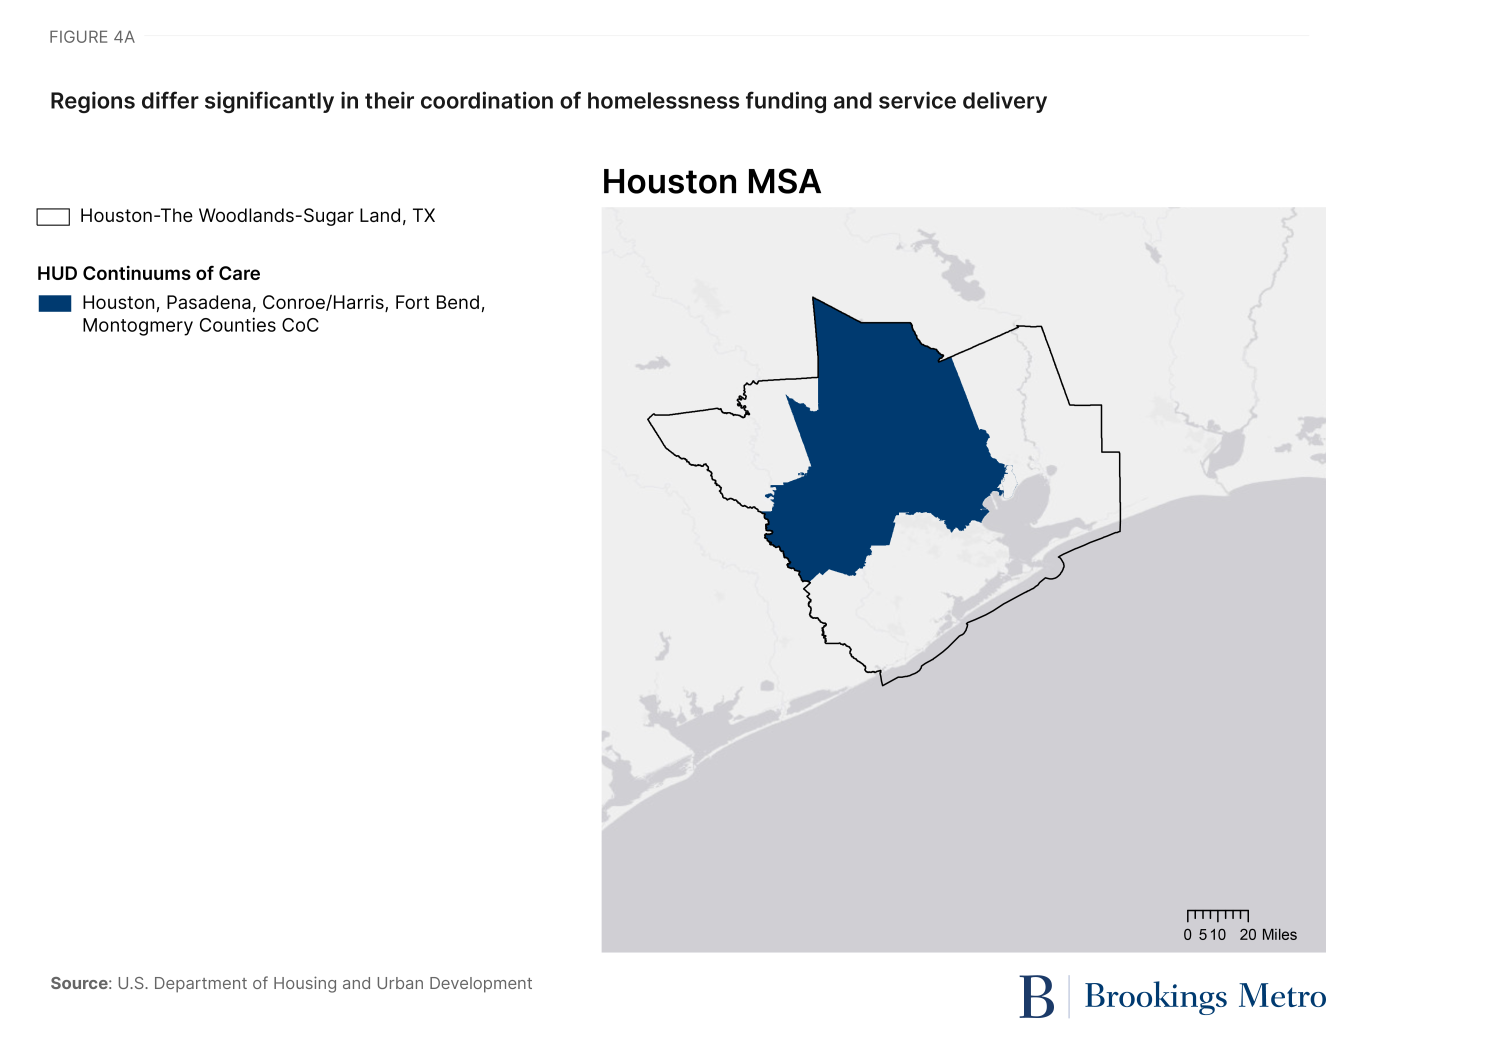 Figure 4. Regions differ significantly in their coordination of homelessness funding and service delivery - Houston